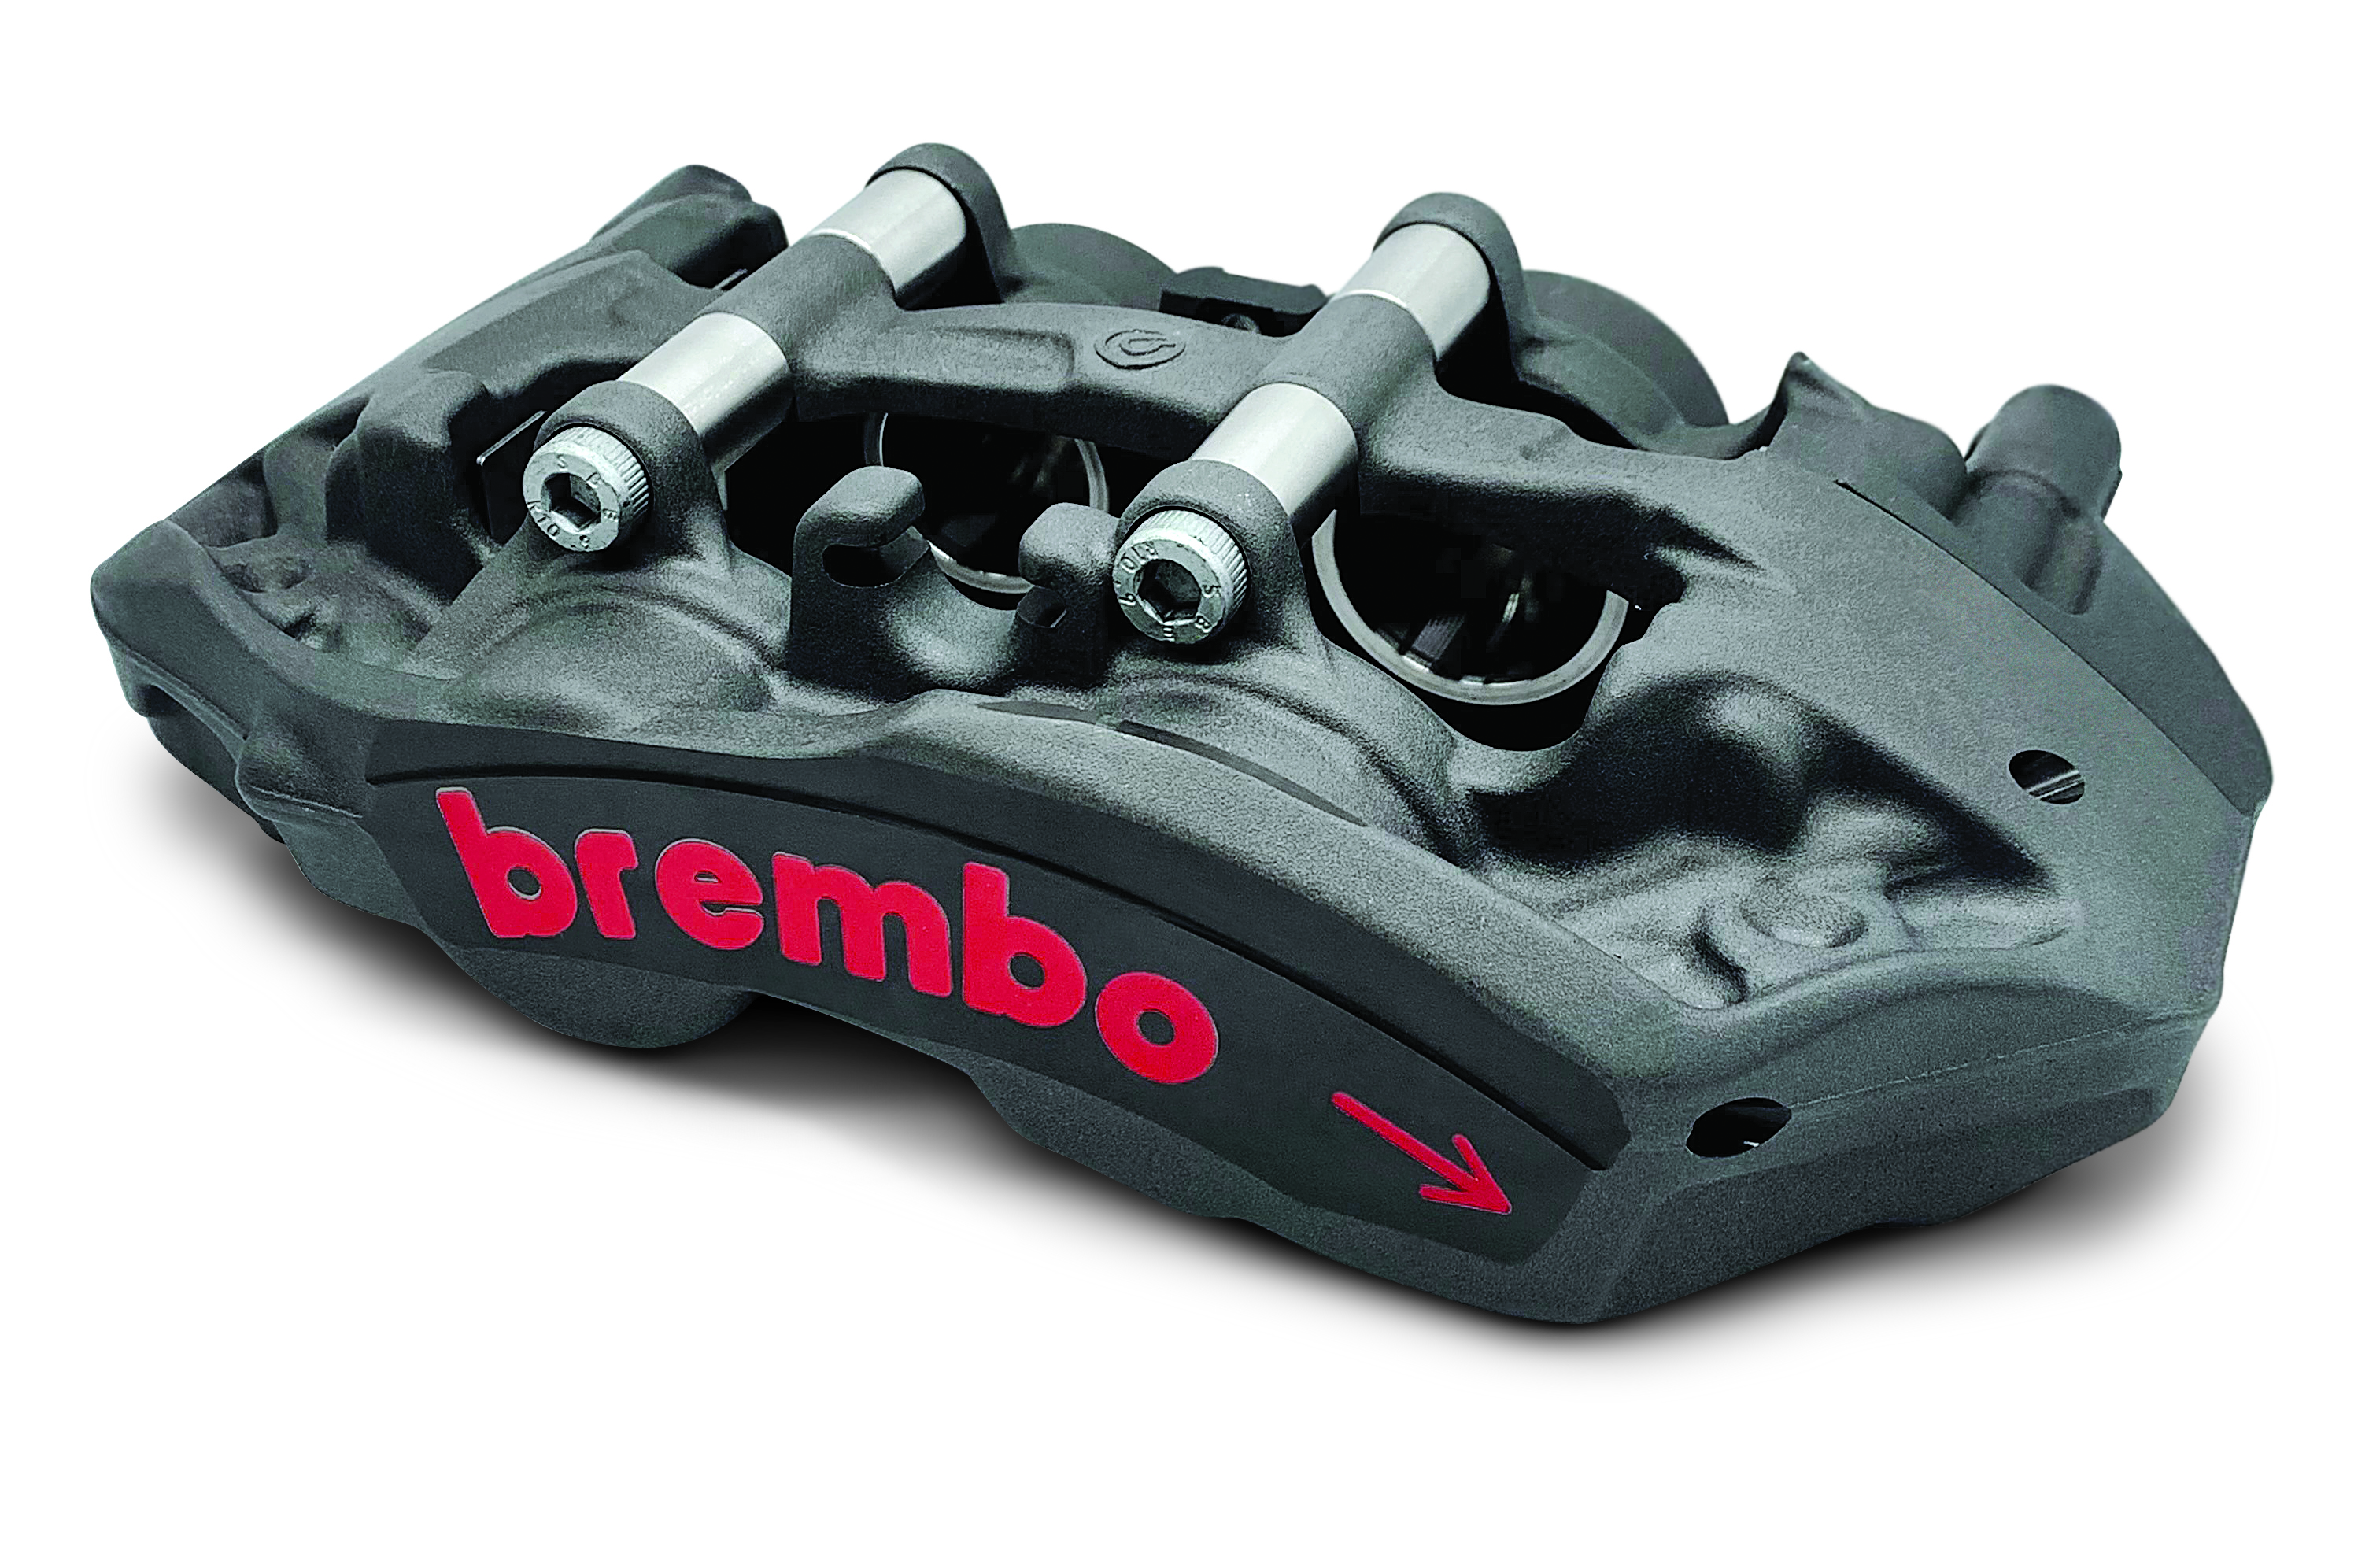 Brembo introduces all new braking system for dirt and asphalt late